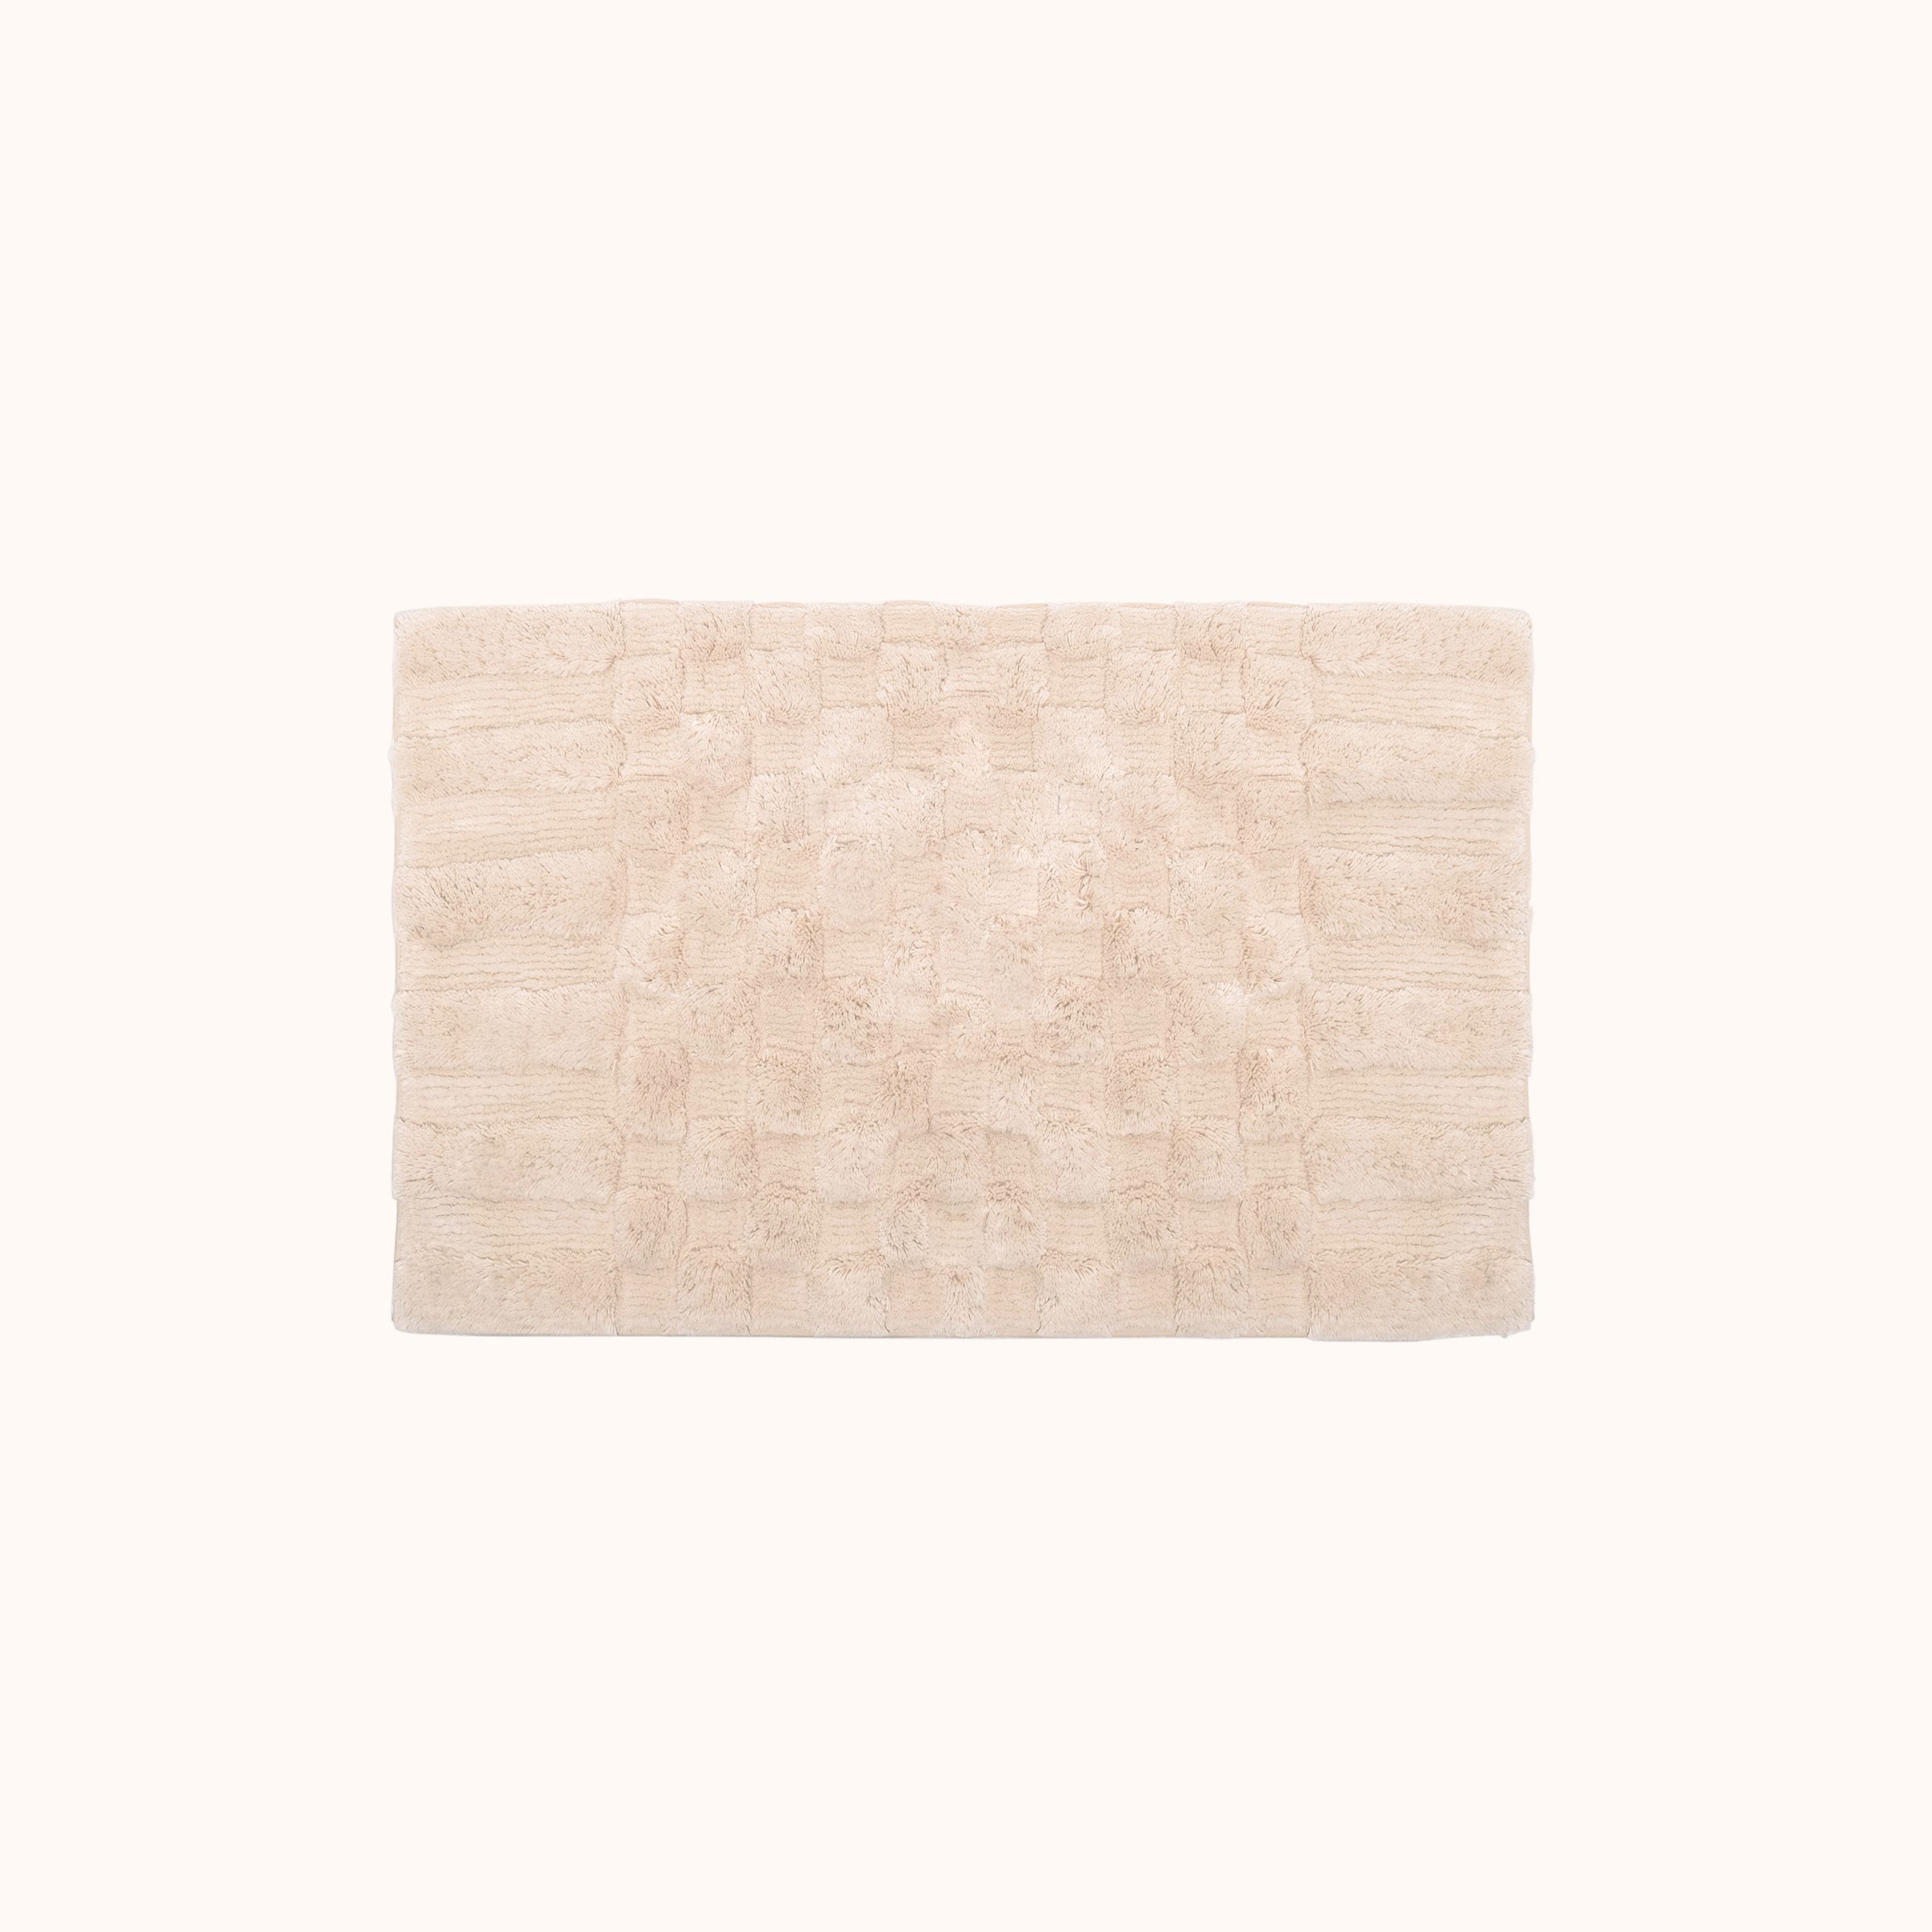 a white rug on a white background